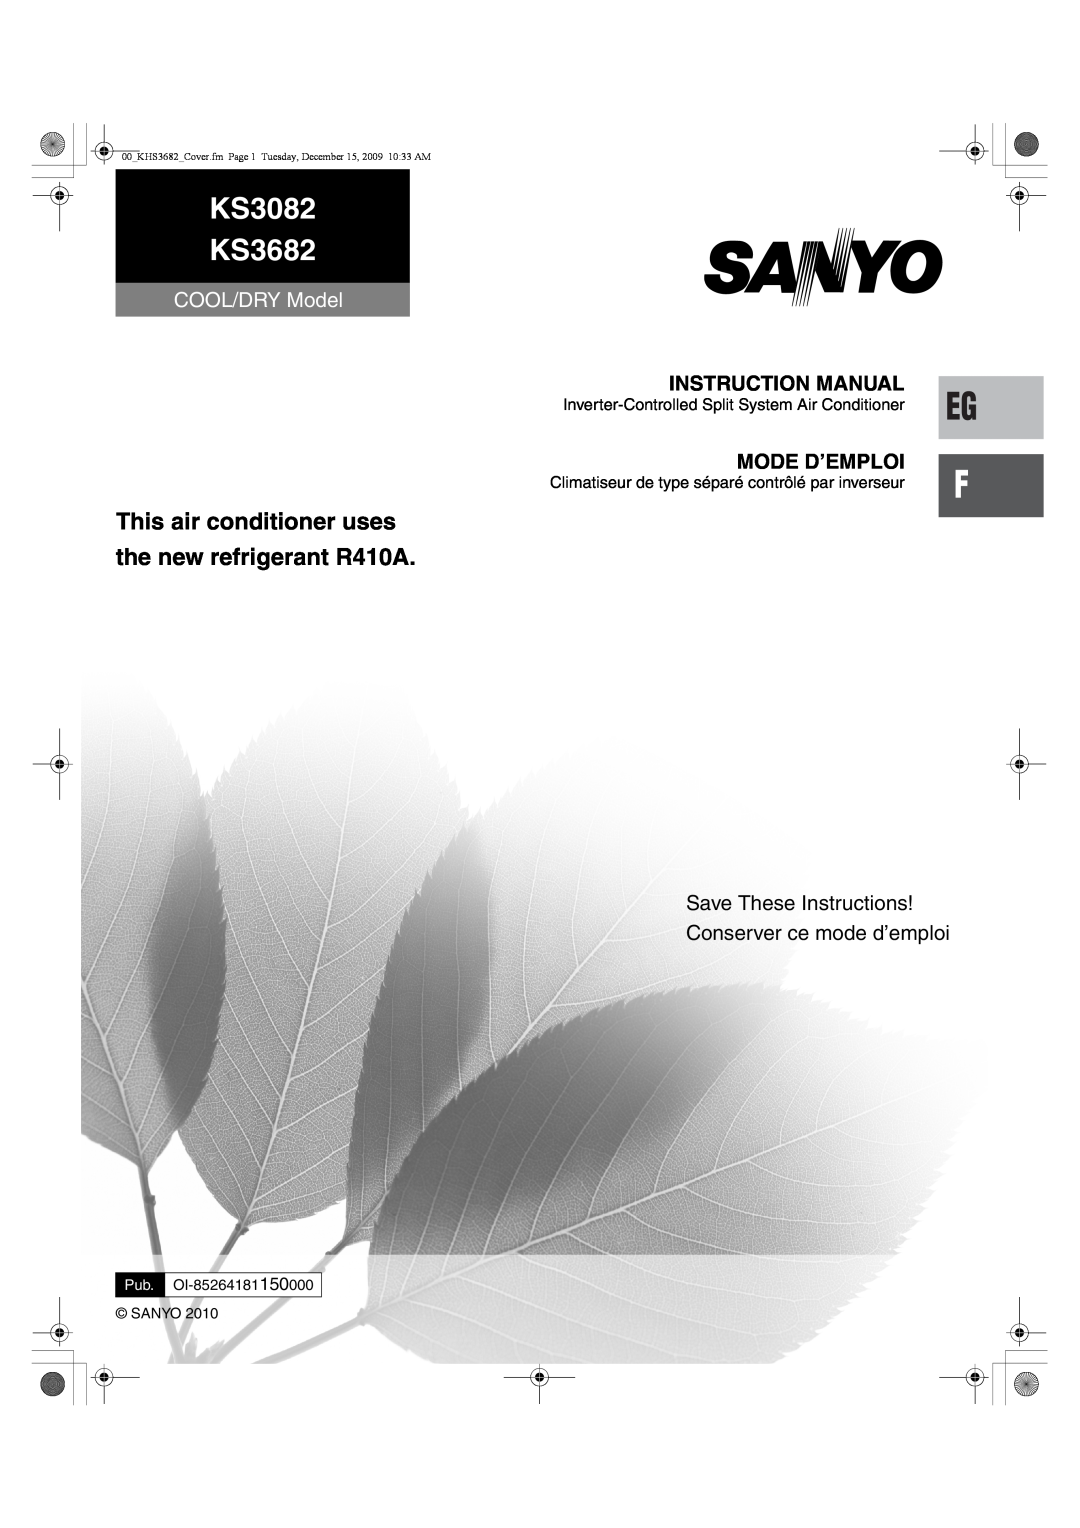 Sanyo instruction manual Mode D’Emploi, KS3082 KS3682, This air conditioner uses, the new refrigerant R410A 